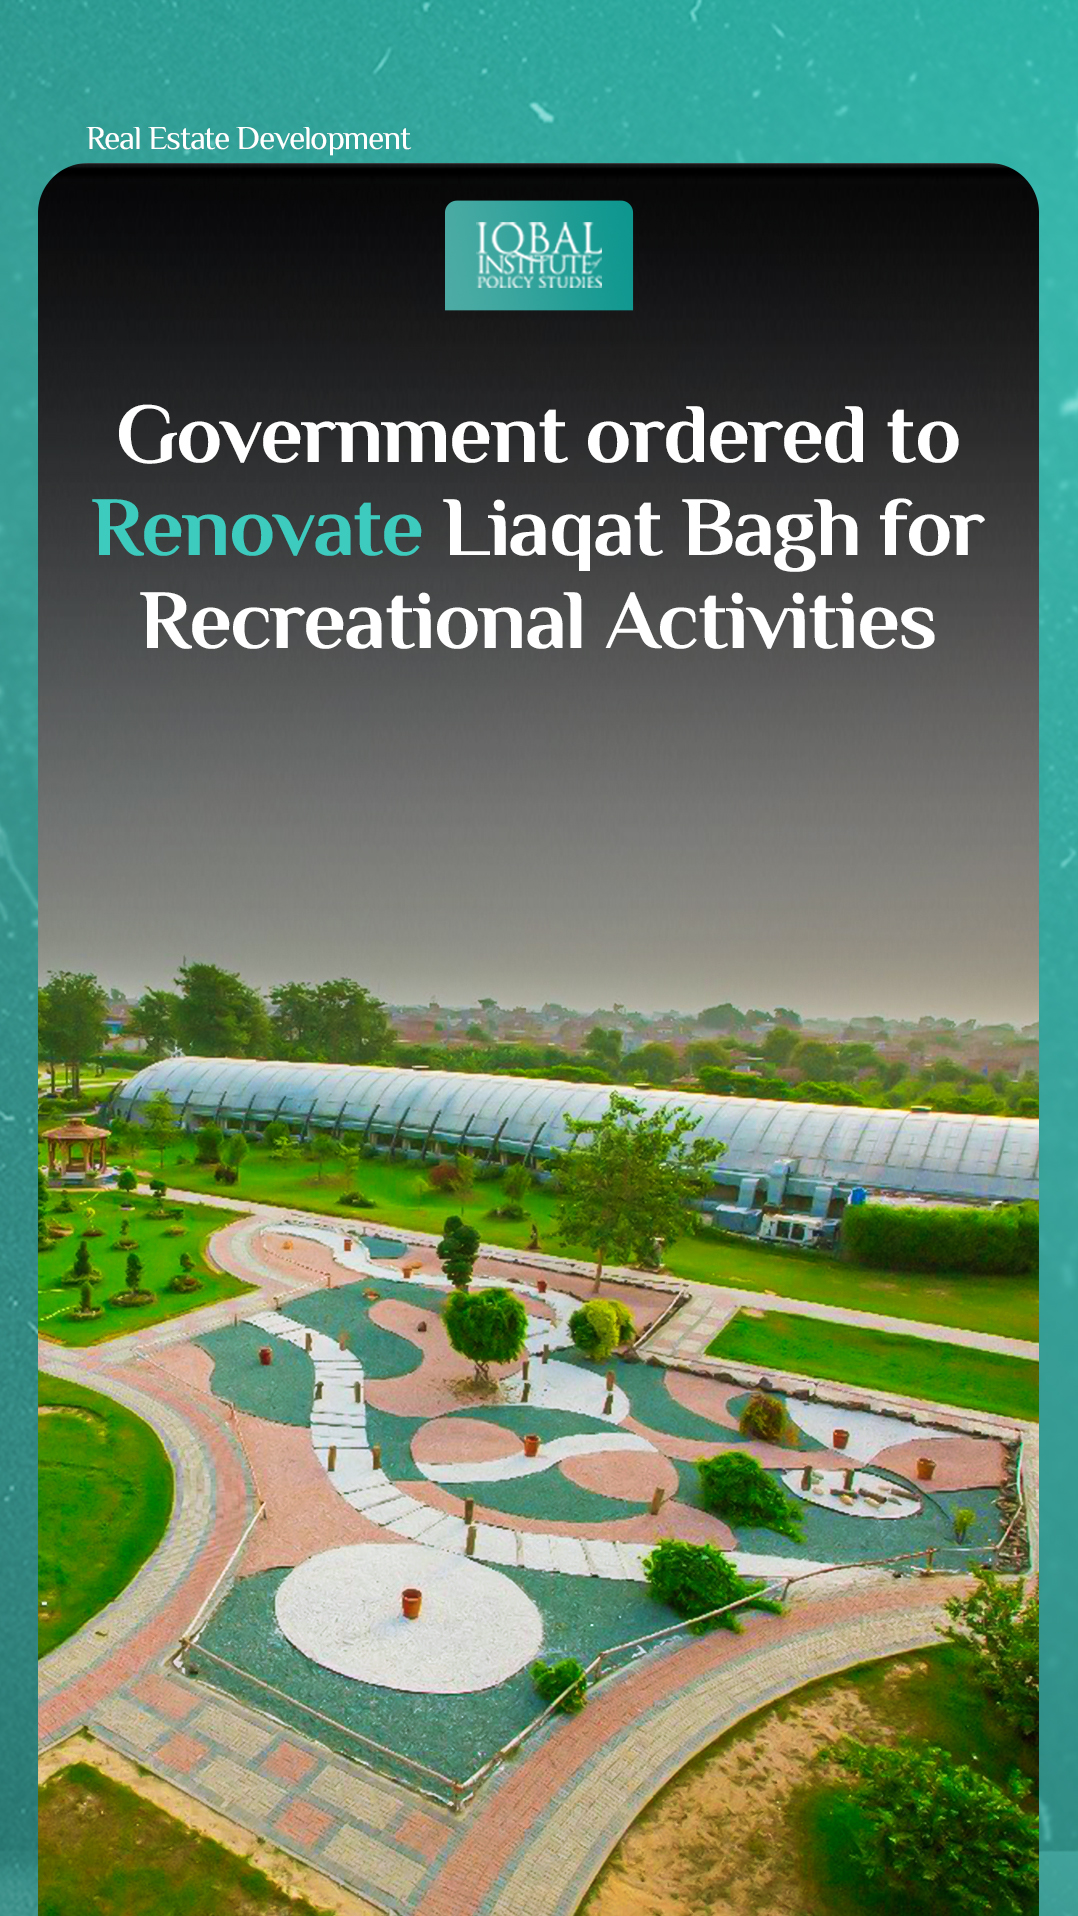 Government ordered to renovate Liaqat Bagh for Recreational Activities